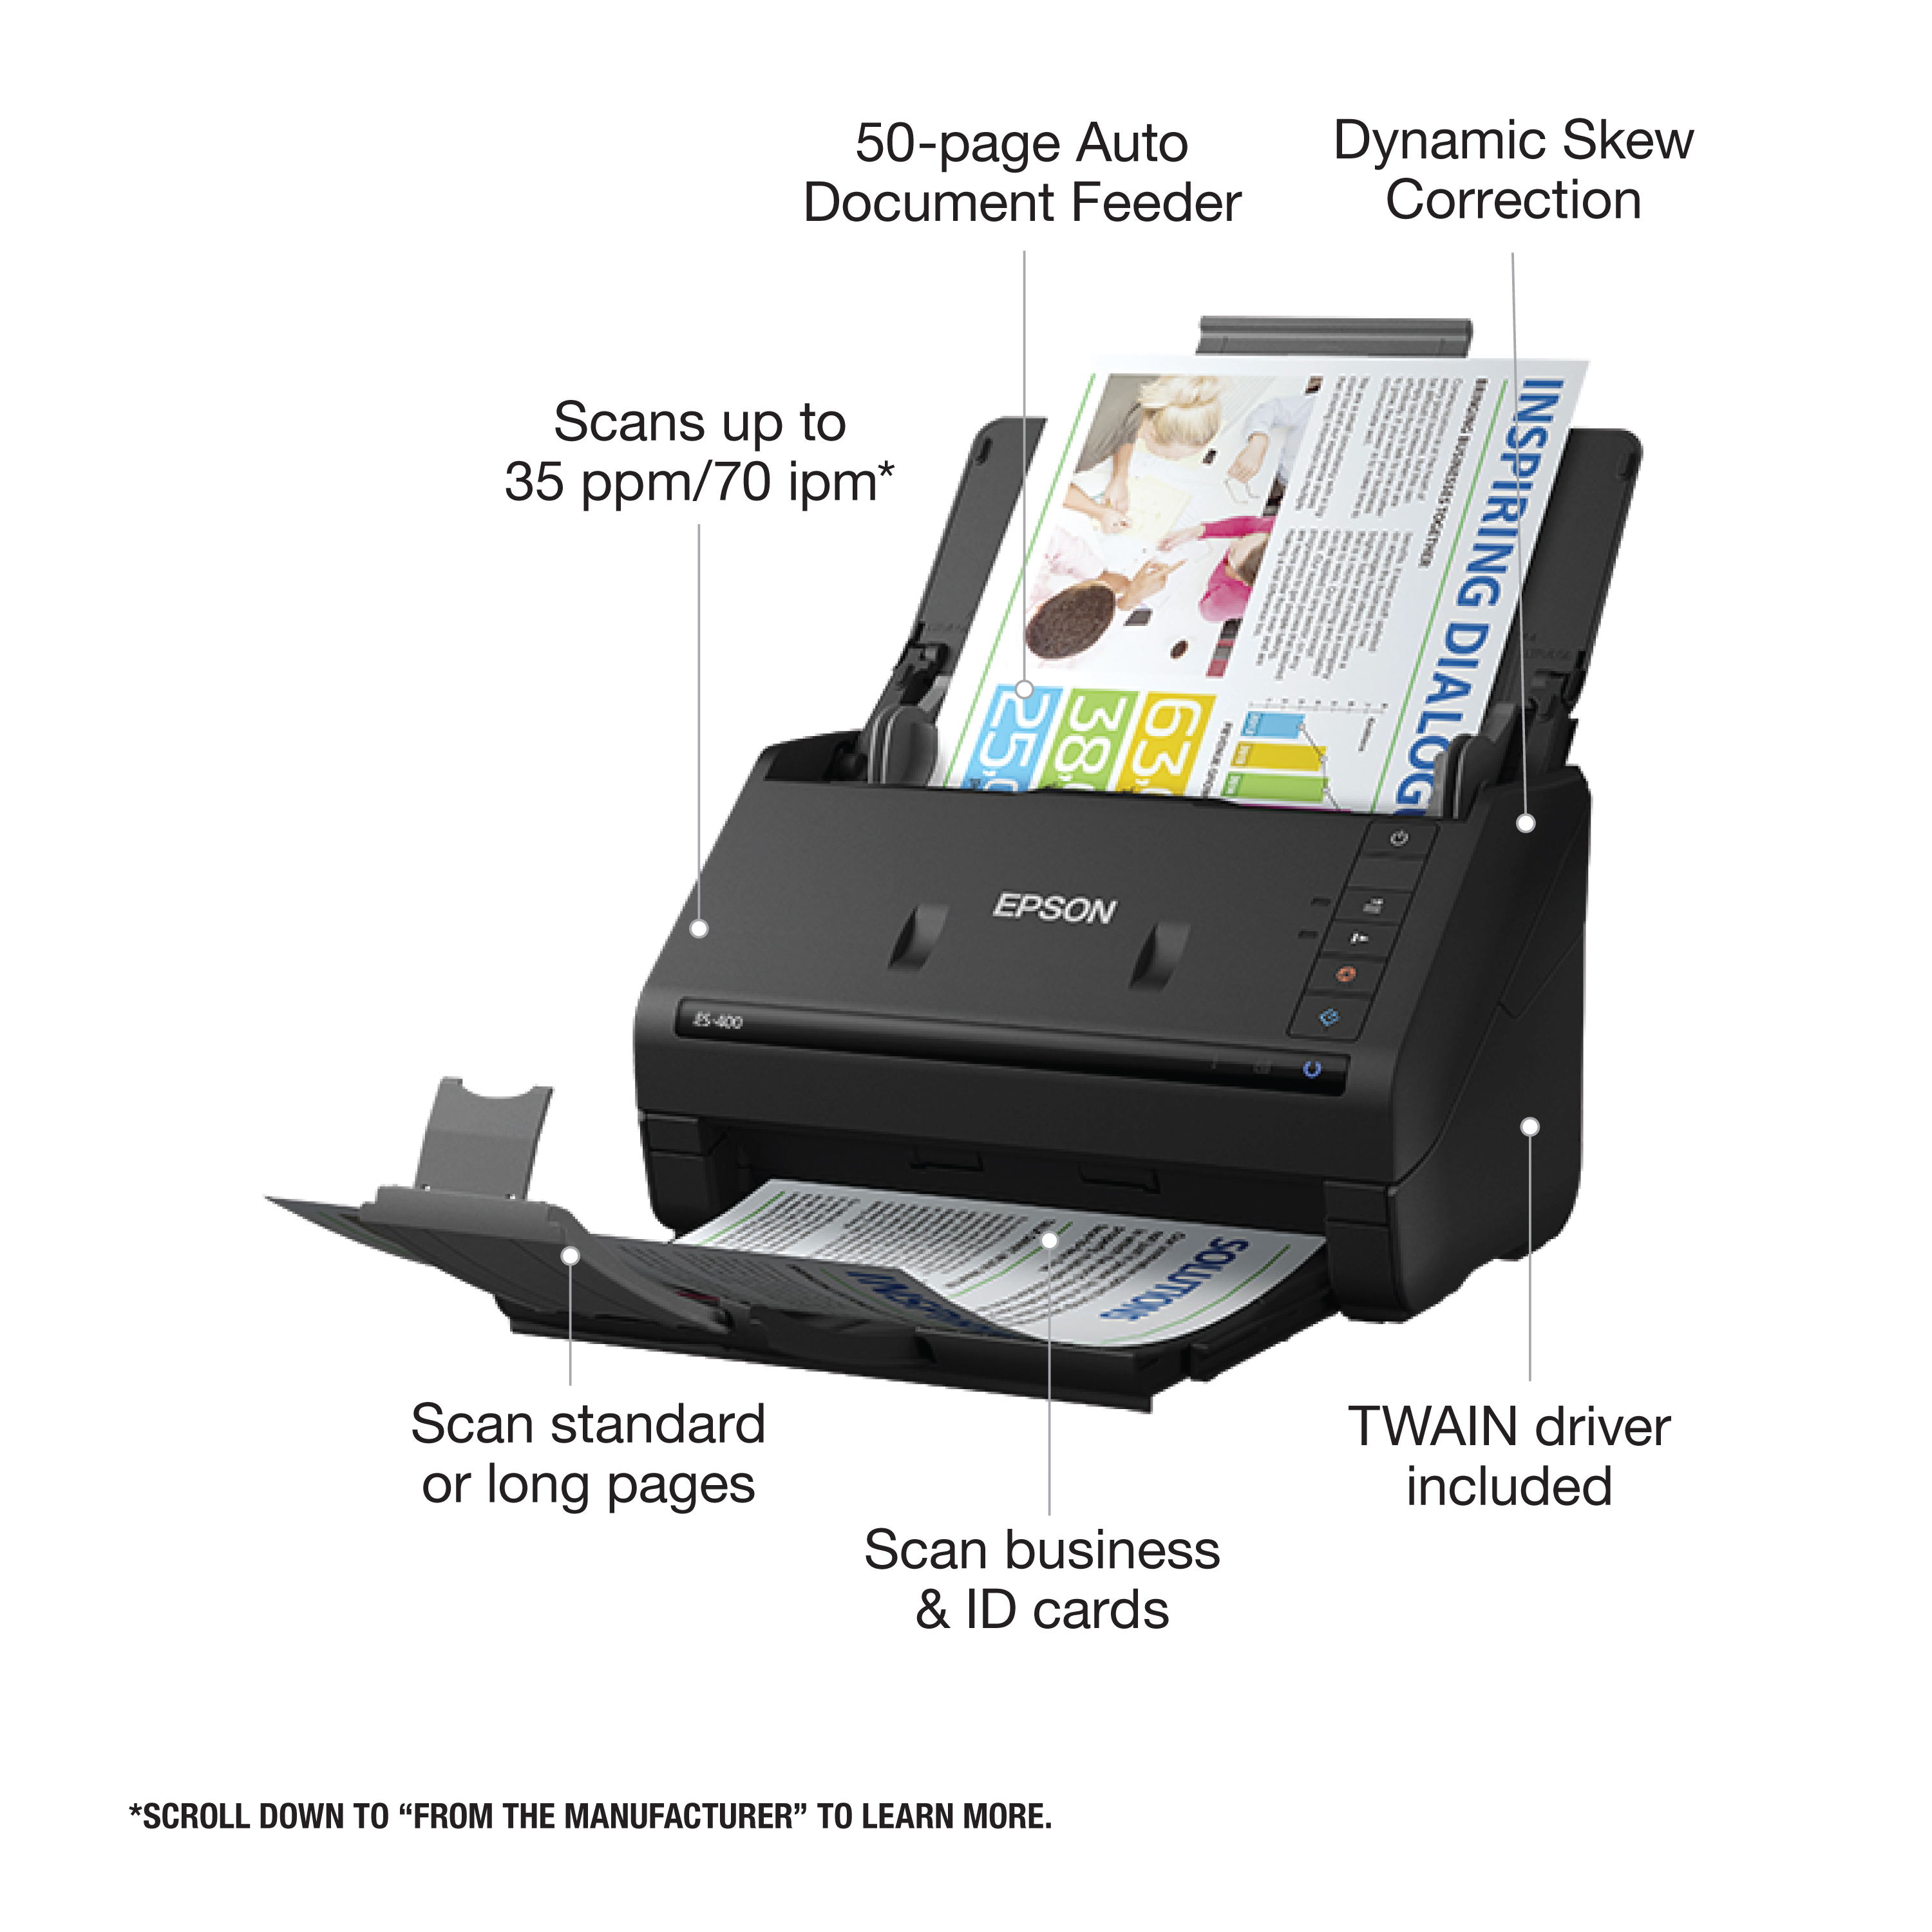 Epson WorkForce ES-400 Color Duplex Document Scanner for PC and Mac, Auto Document Feeder (ADF) - image 3 of 7